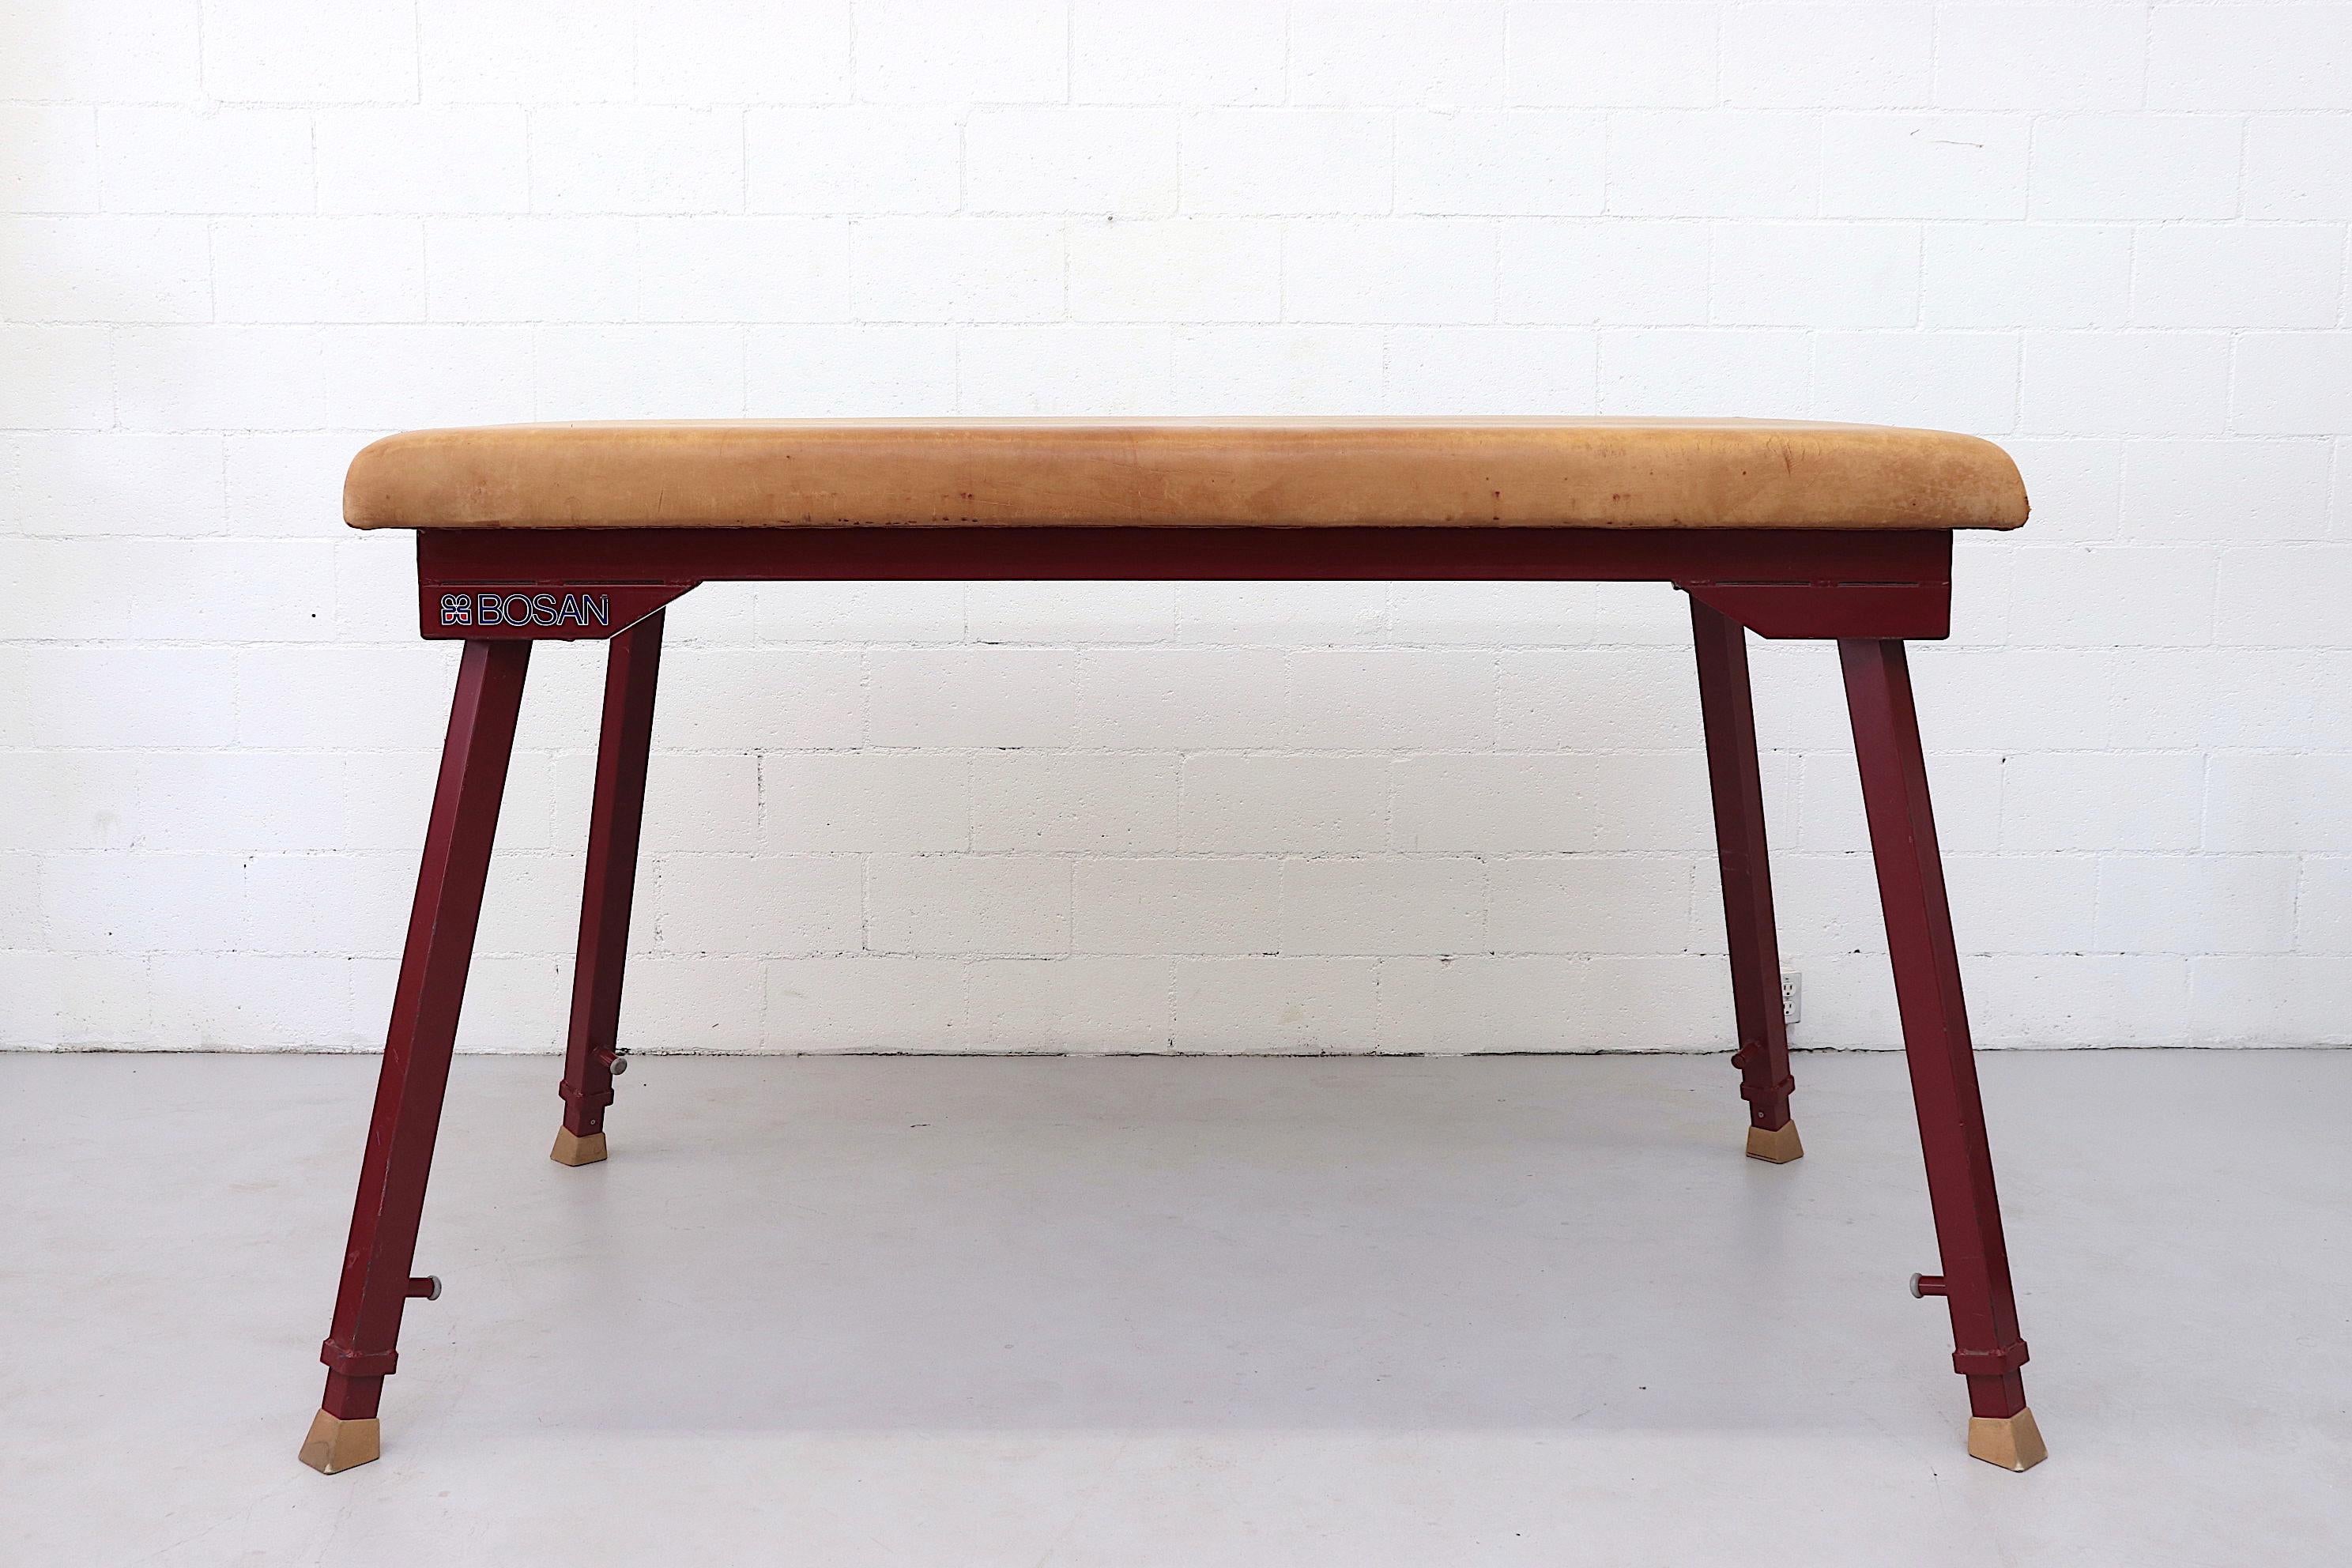 Impressive, Mid-Century, extra large leather gym mat with heavy extendable legs. Manufactured Janssen-Fritsen. Legs can raise up to 5 feet tall. Natural leather top with red enameled metal frame is in original condition with some visible scratches